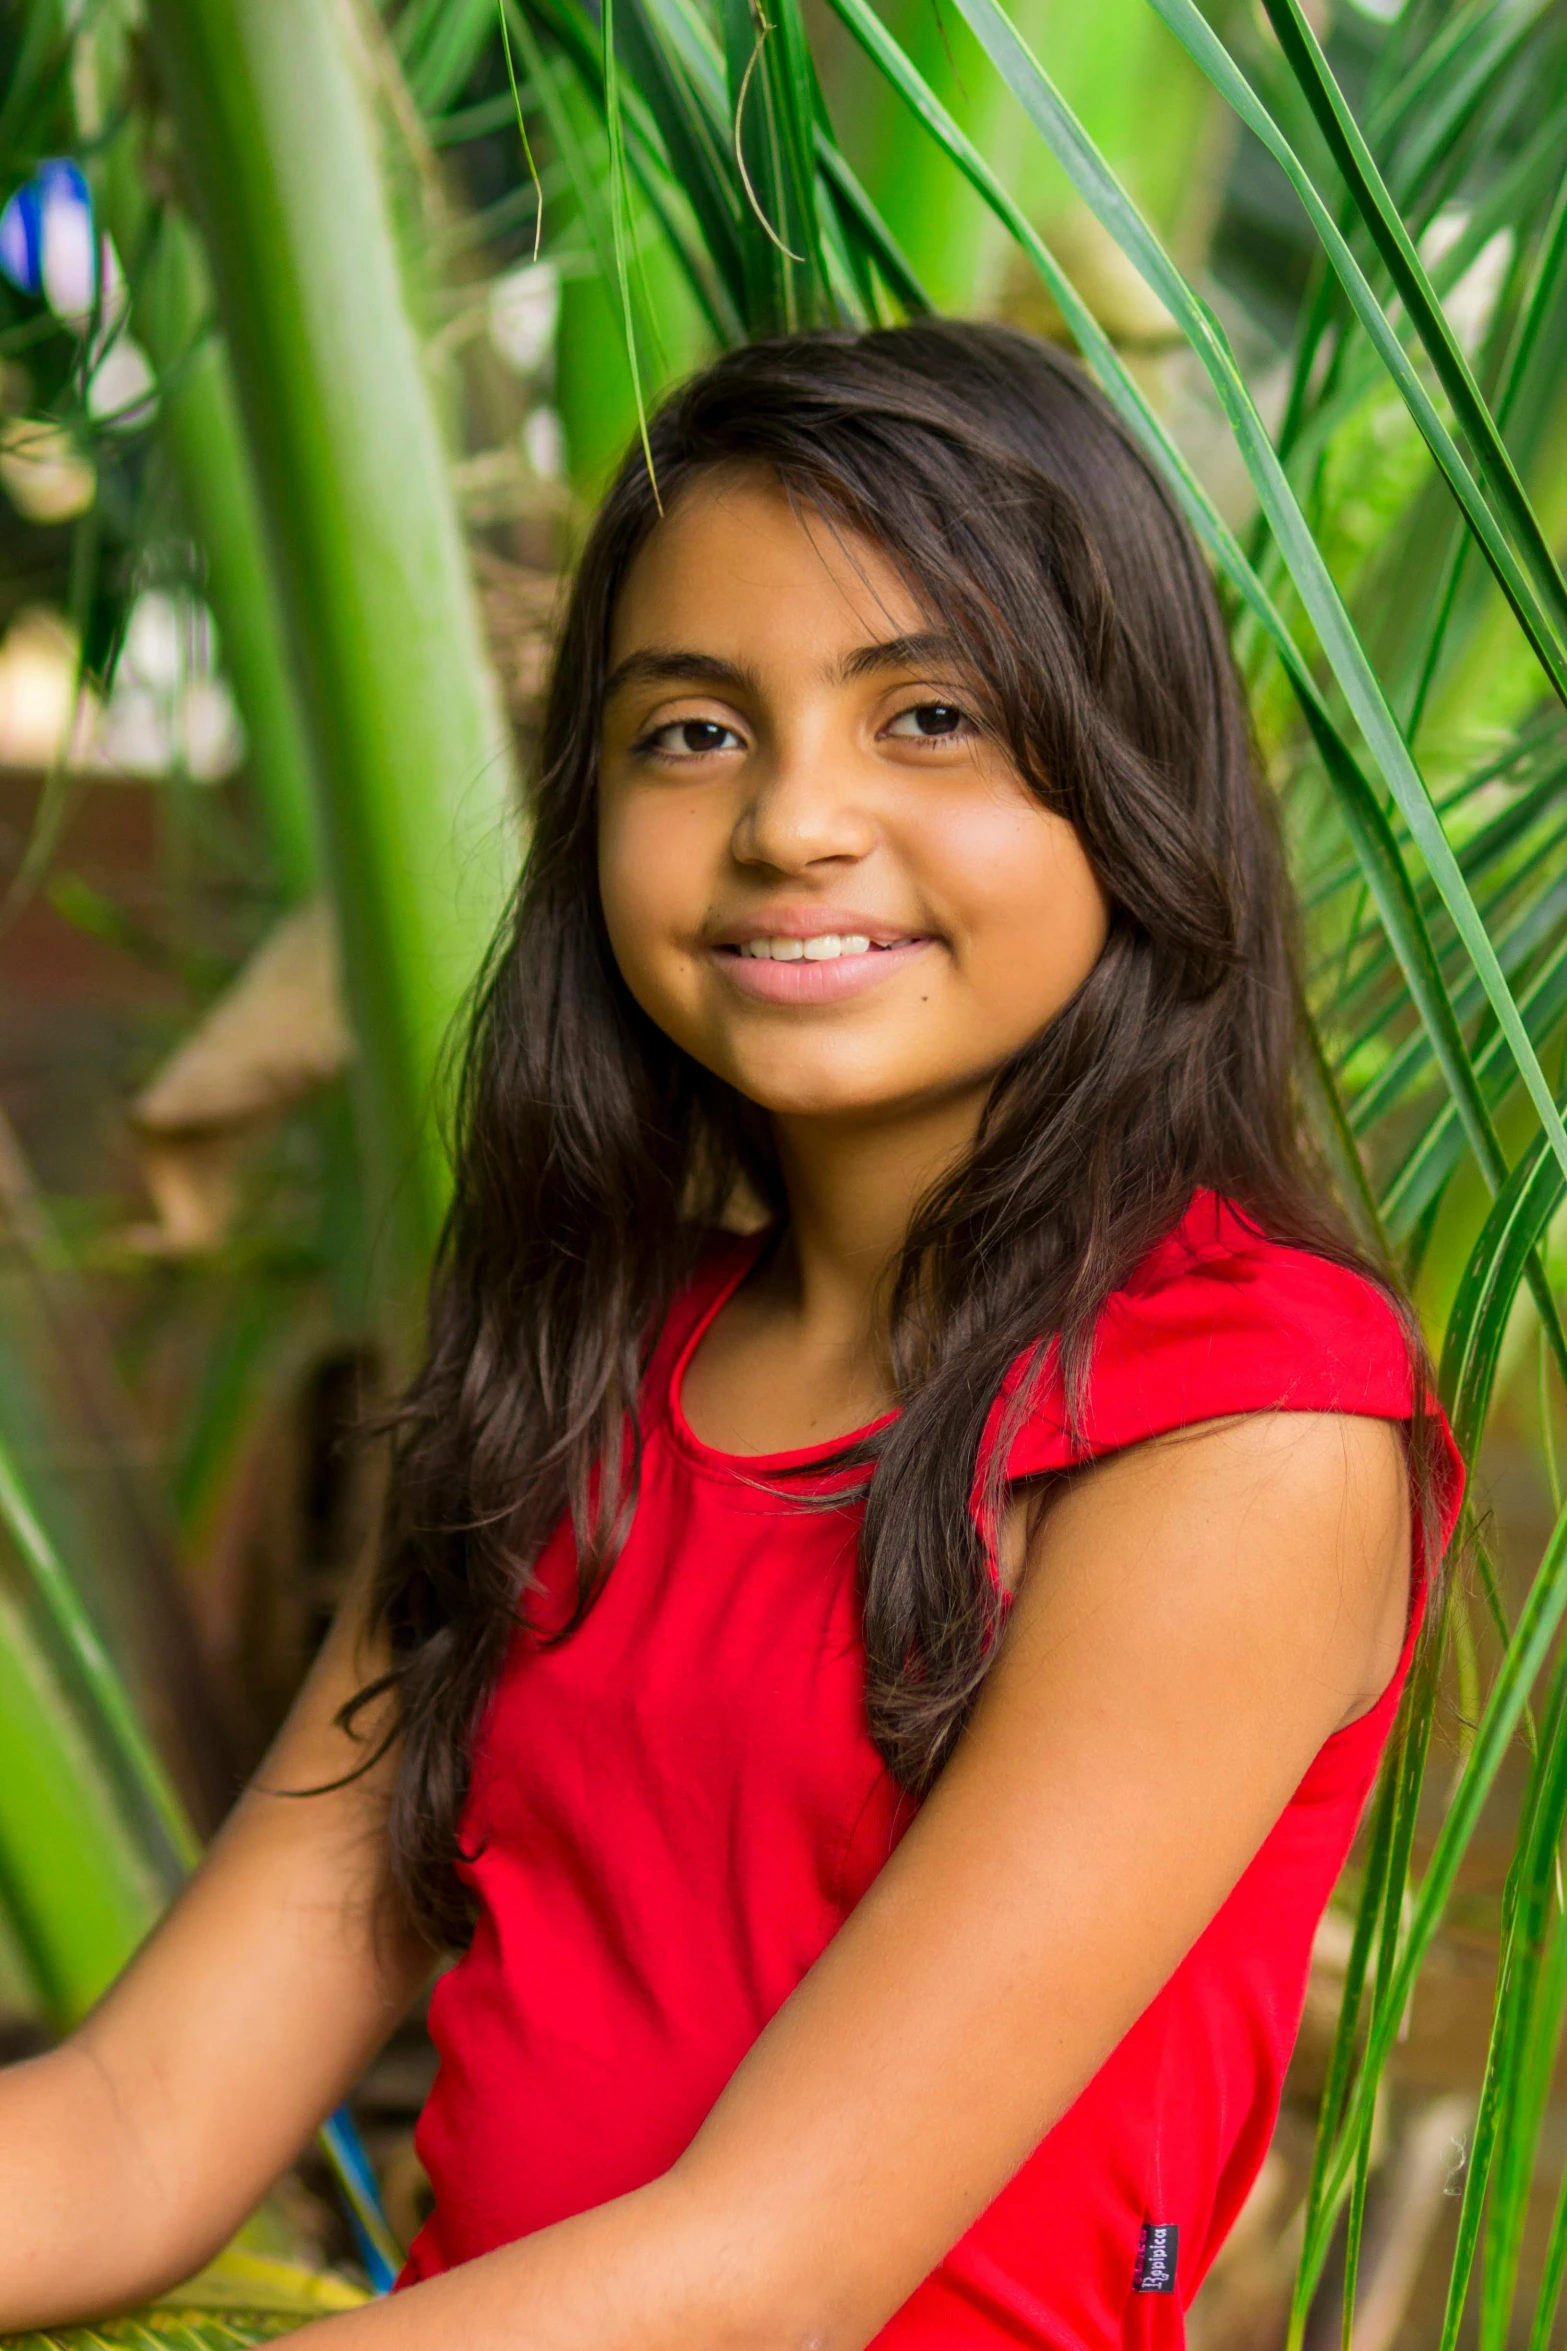 a young girl sitting on top of a palm tree, by reyna rochin, long hair and red shirt, headshot profile picture, jayison devadas, years old